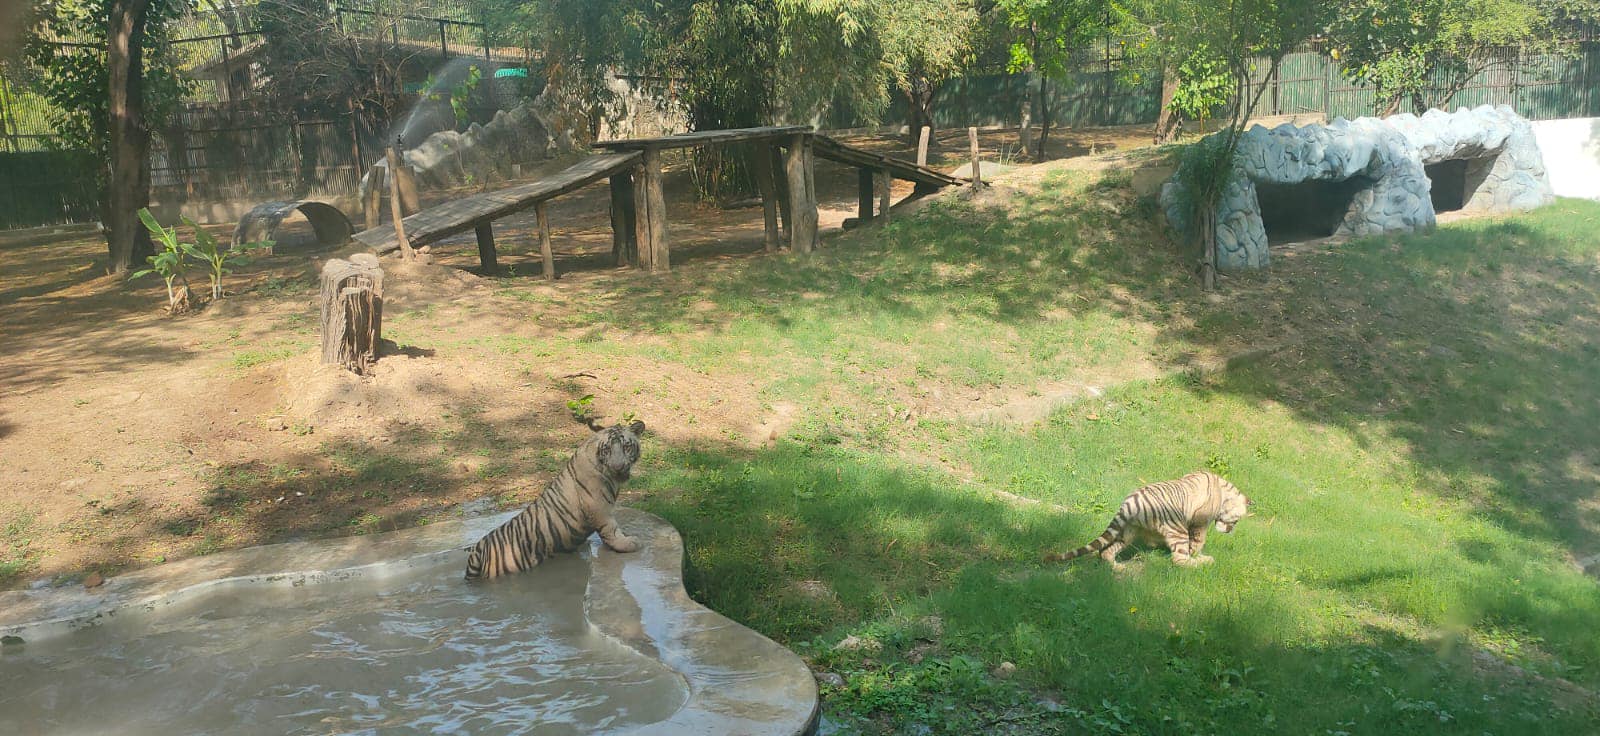 VISIT TO NATIONAL ZOOLOGICAL PARK